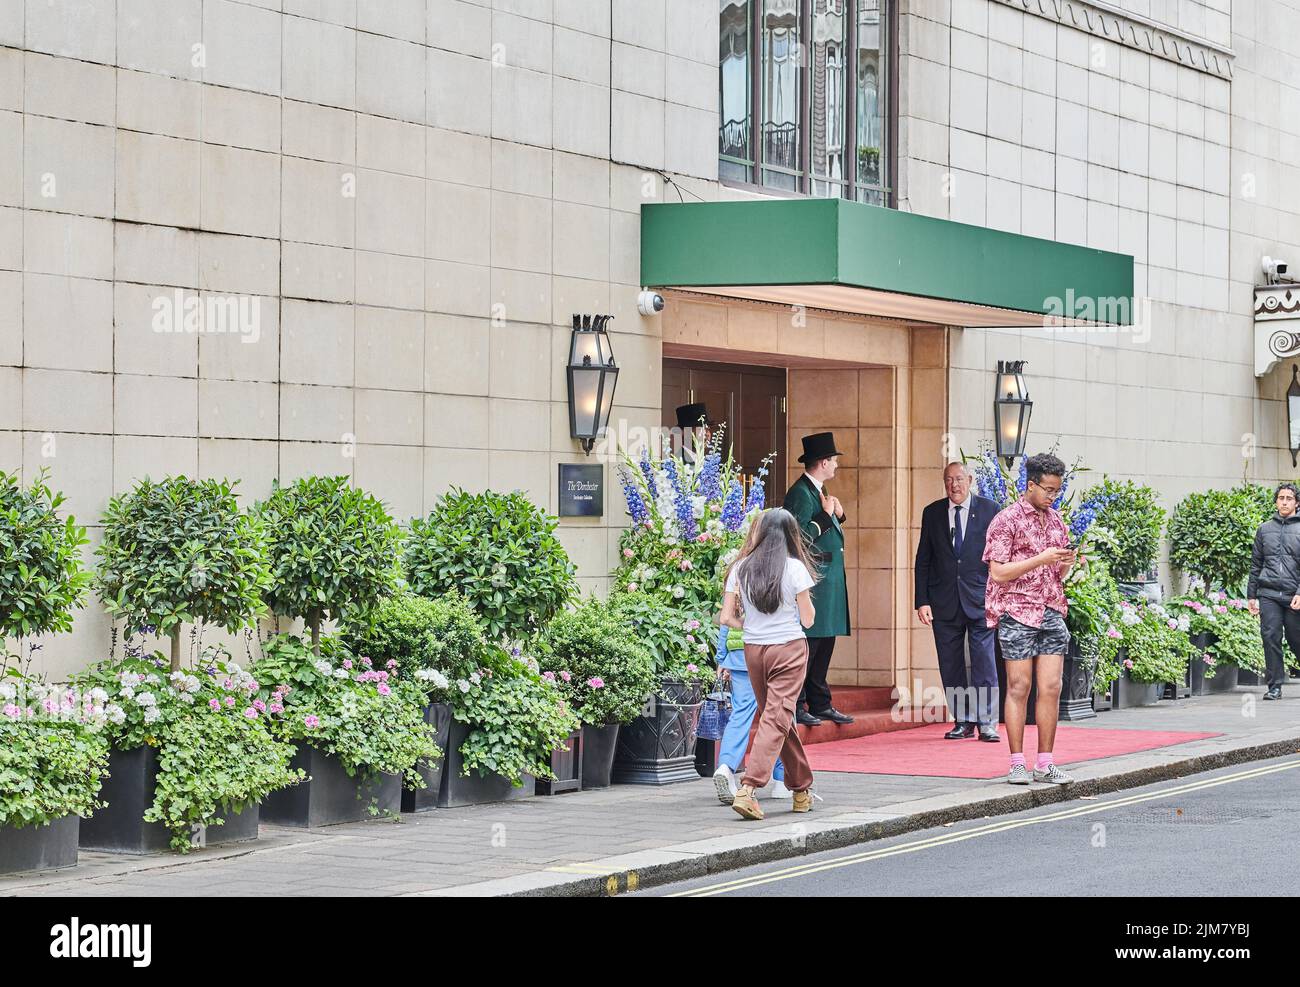 Security doormen and a guest outside the main entrance to the Dorchester hotel Mayfair, London, England. Stock Photo